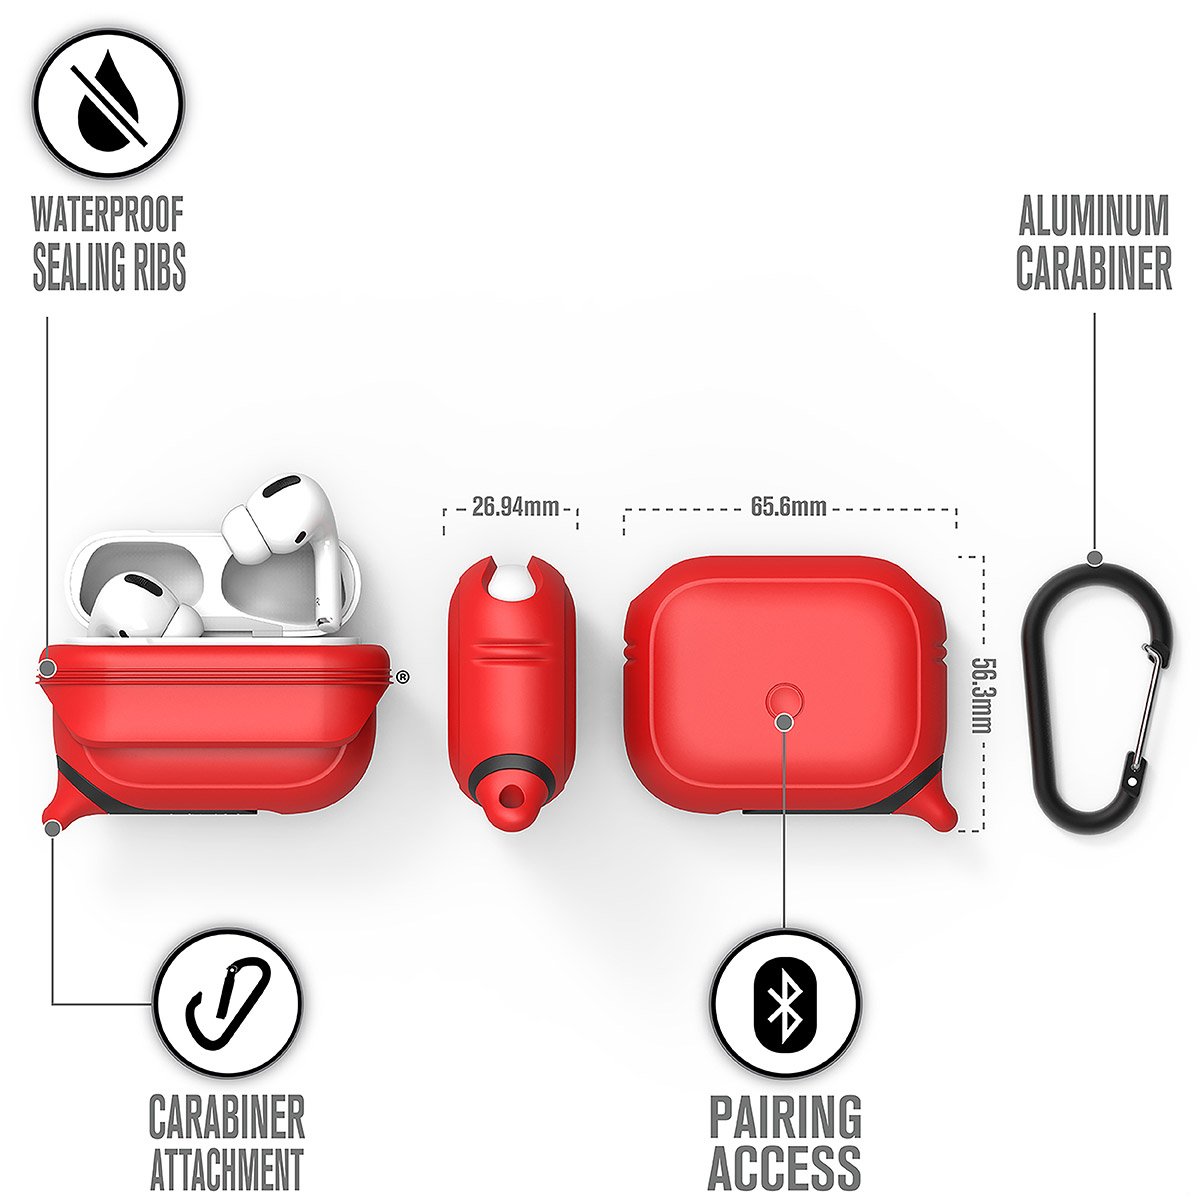 CATAPDPRORED | catalyst airpods pro gen 2 1 waterproof case carabiner flame red different views showing the sealing ribs carabiner attachment loop and pairing access text reads waterproof sealing ribs aluminum carabiner carabiner attachment pairing access